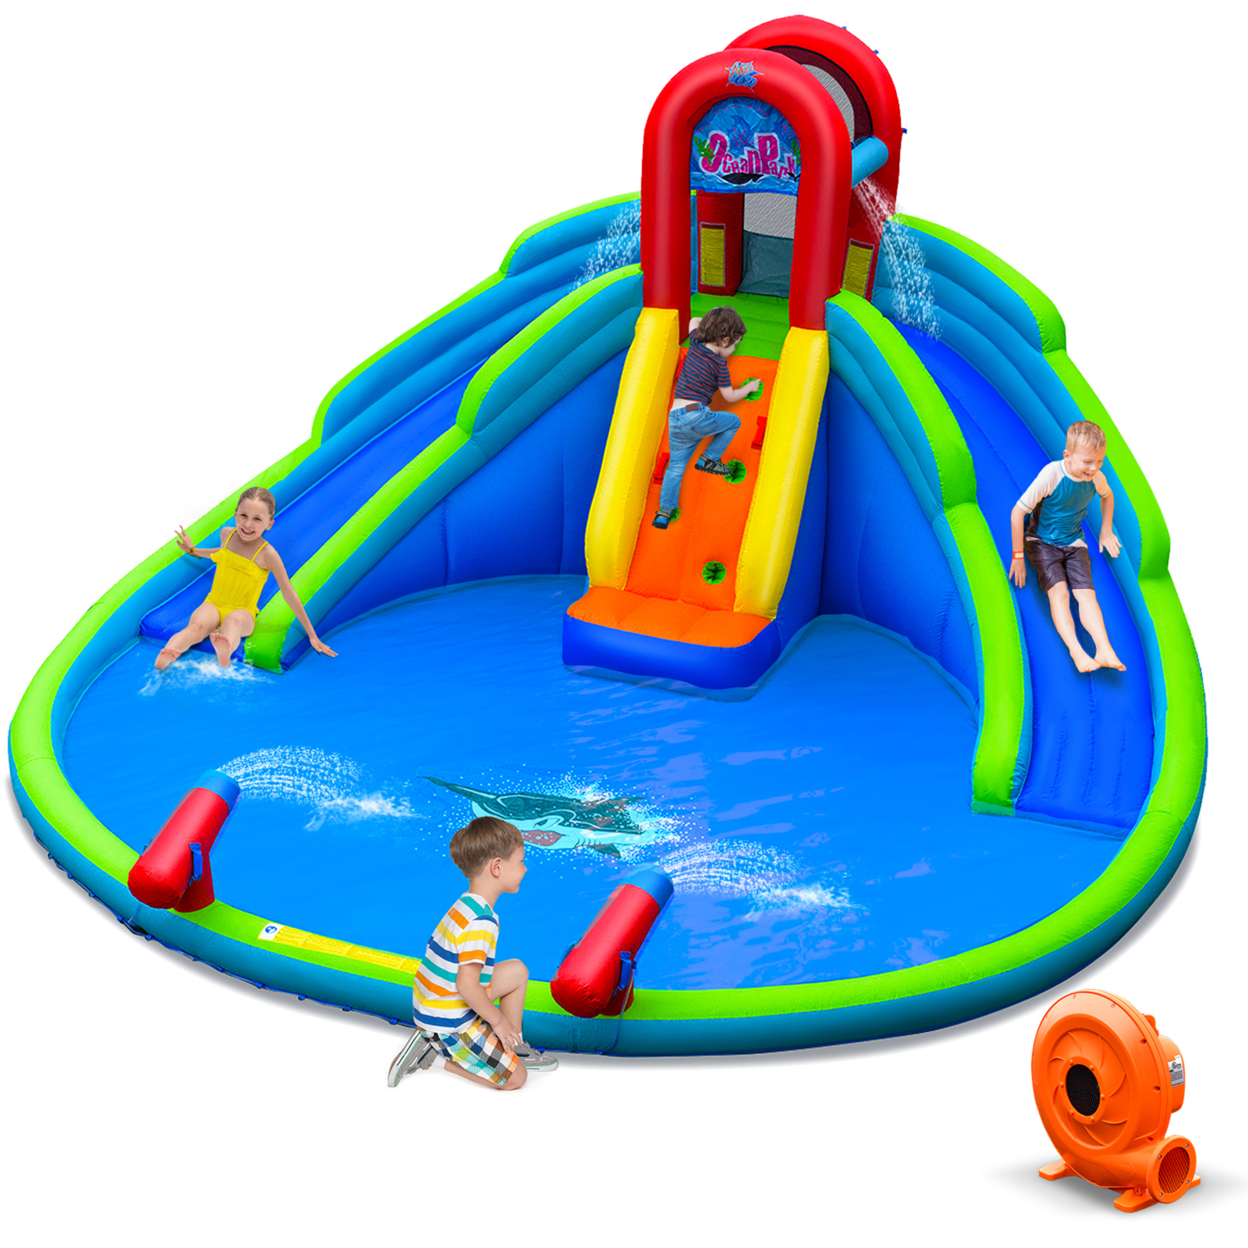 Inflatable Waterslide Wet & Dry Bounce House W/Upgraded Handrail & 780W Blower